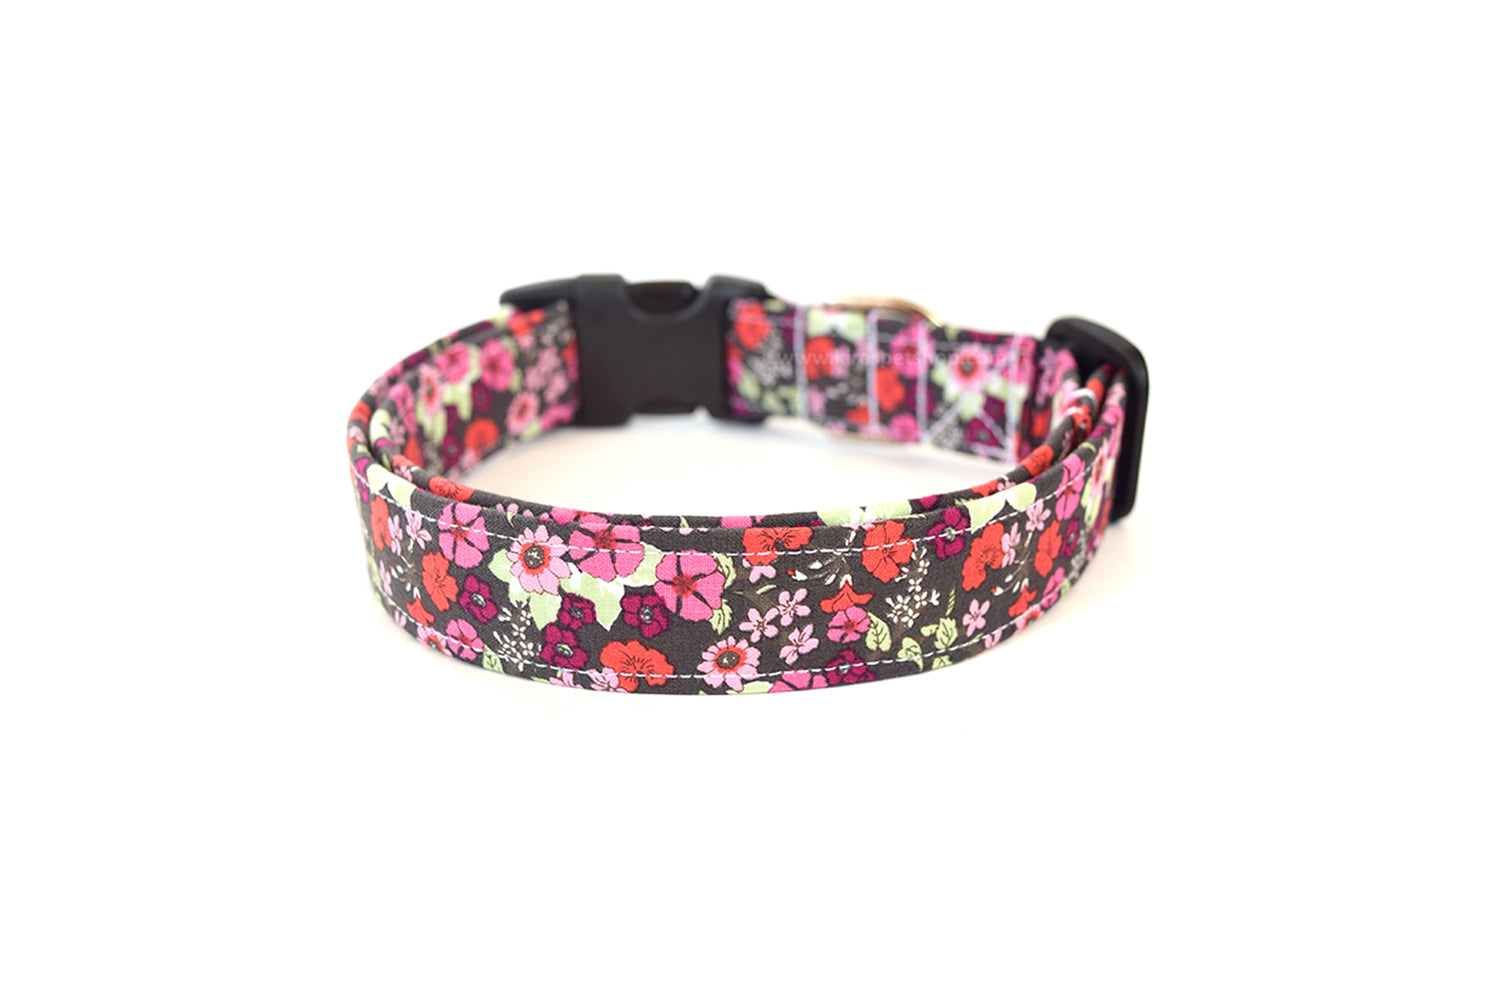 Gray, Red & Pink Floral Dog Collar - Handmade by Kira's Pet Shop